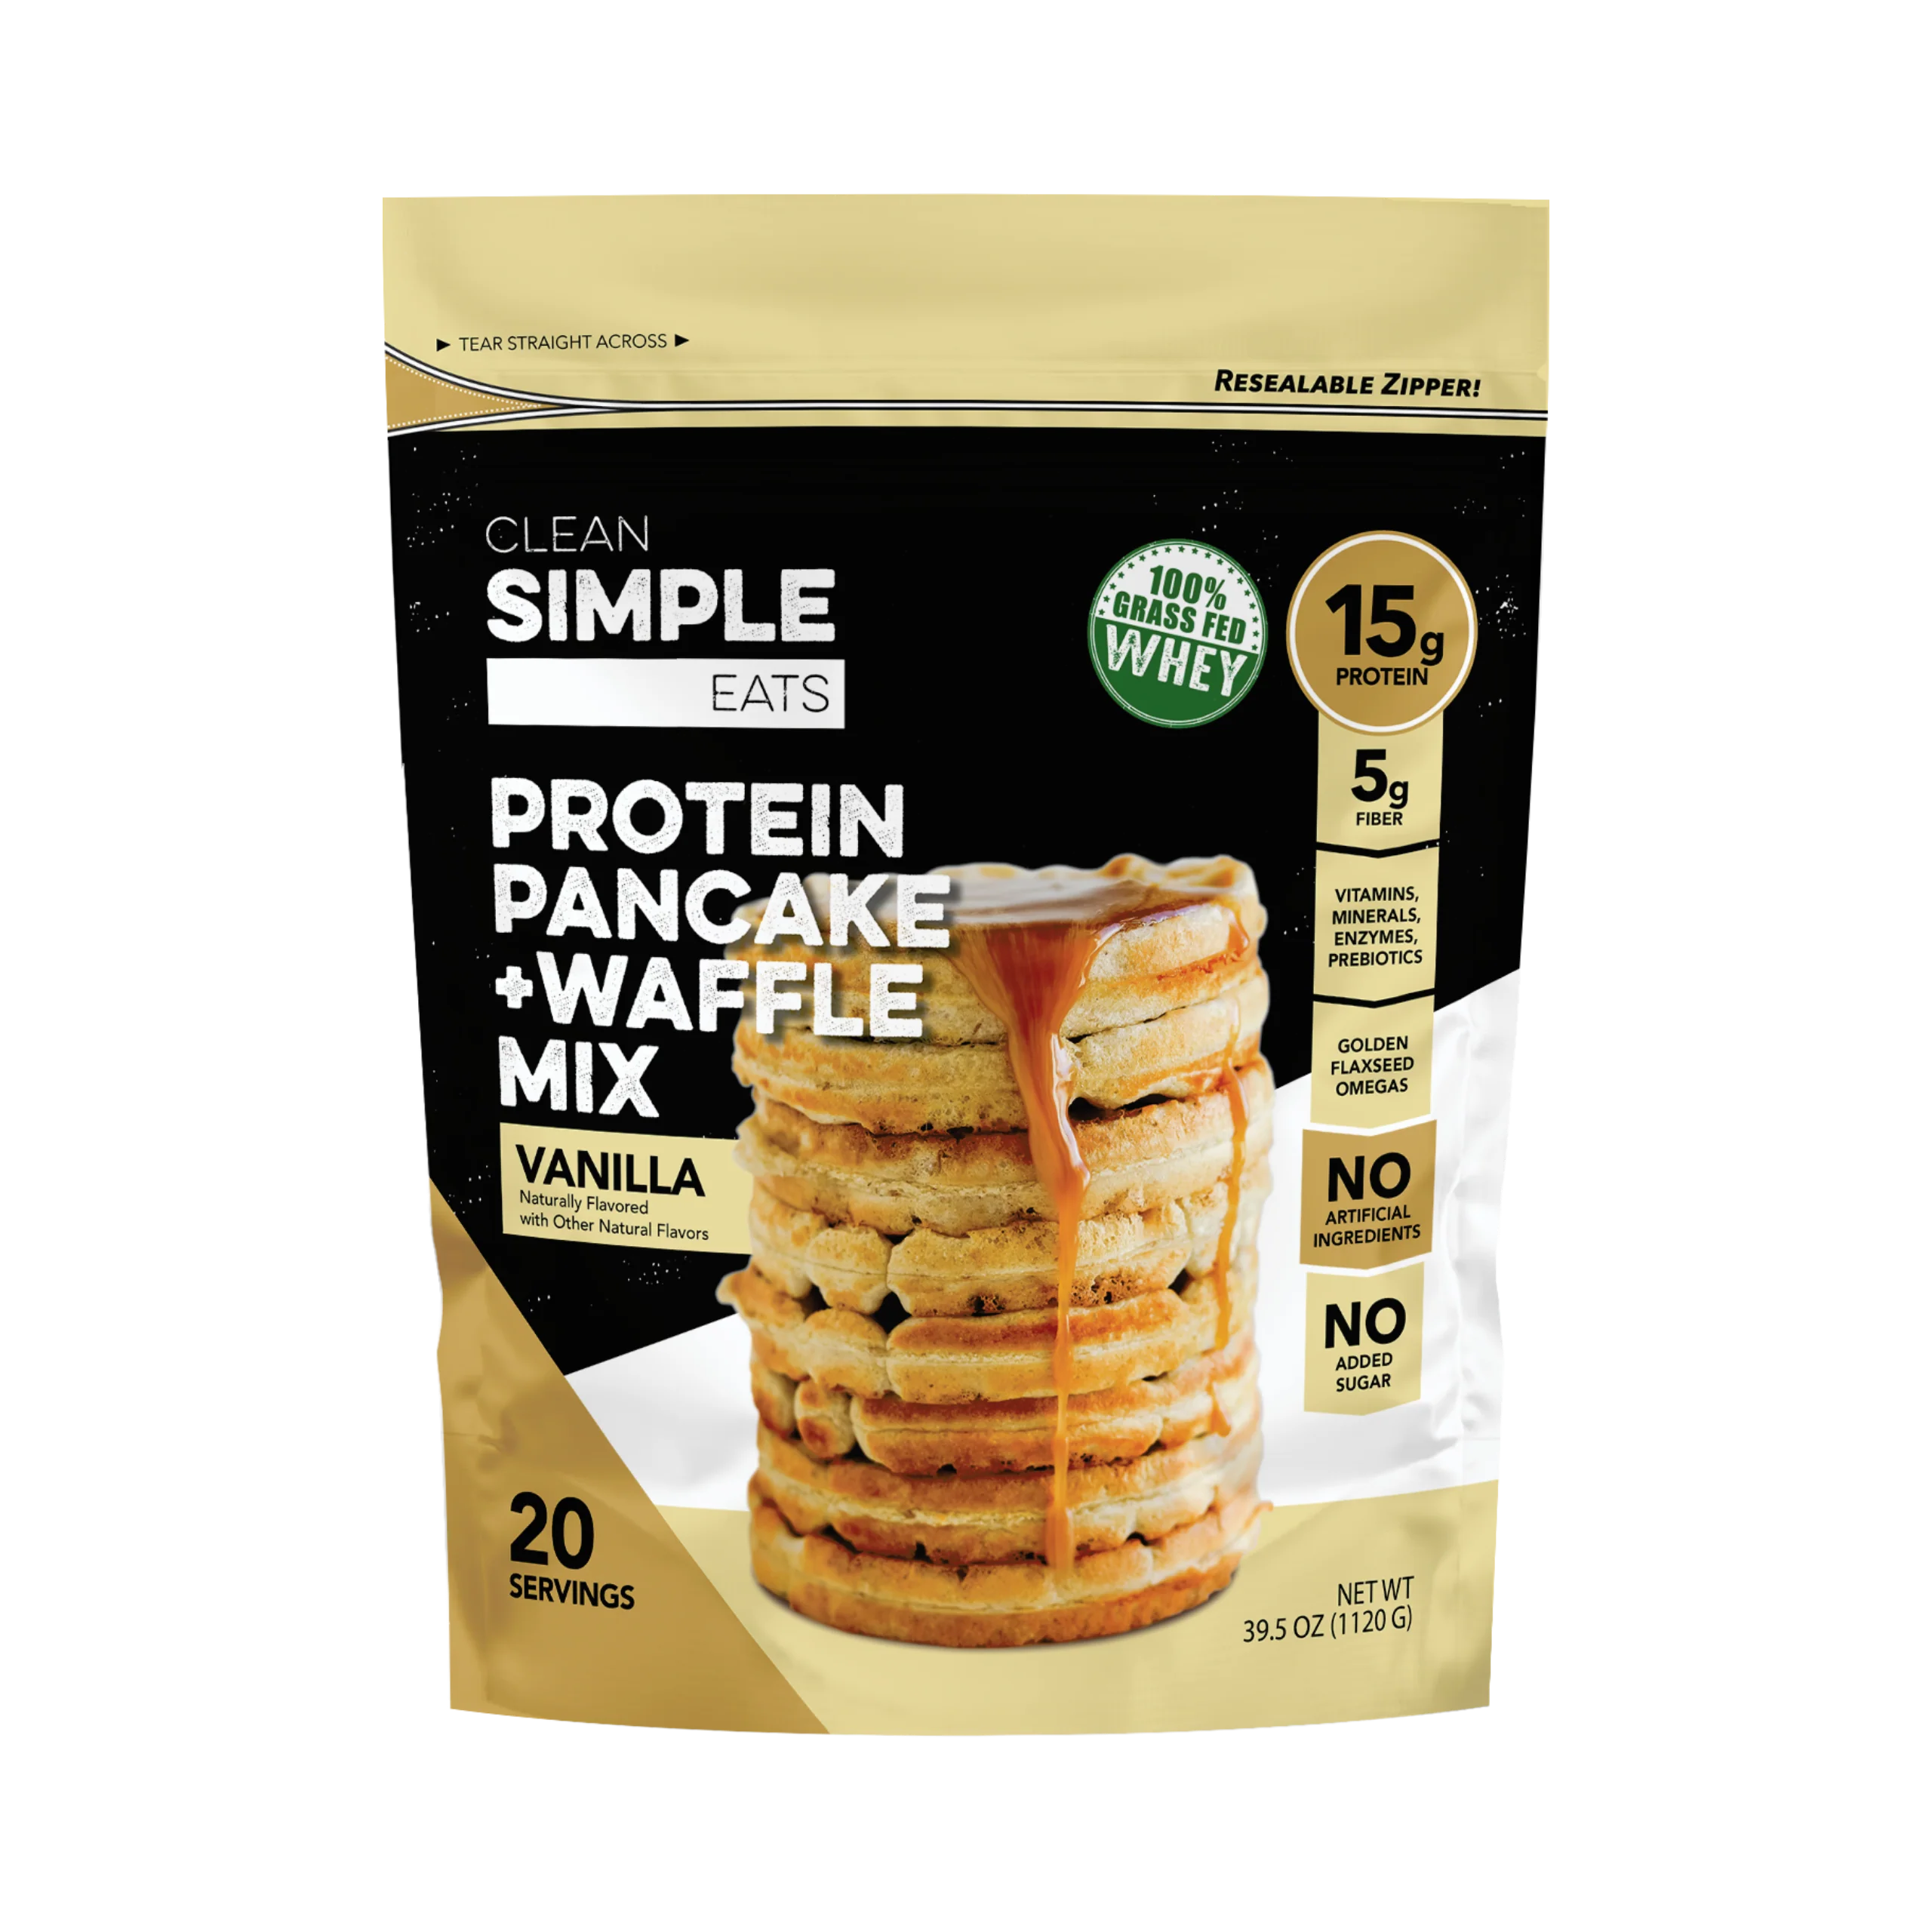 Clean Simple Eats Pancake Mix- use discount code: pounddropper